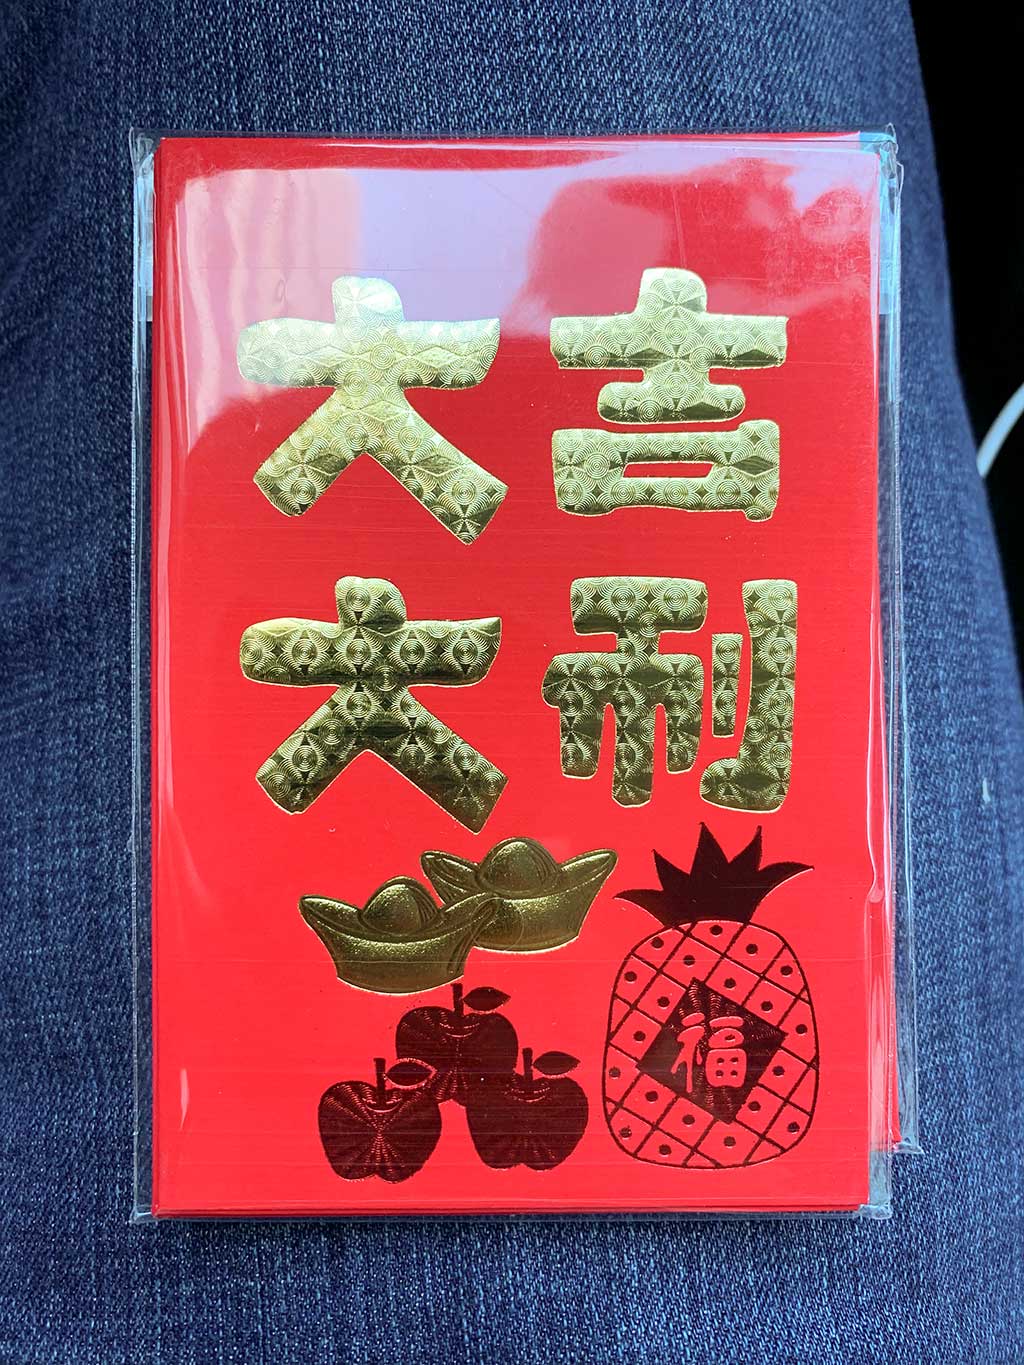 drive-swim-fly-san-francisco-california-chinatown-red-envelope-chinese-new-year-lunar-new-year